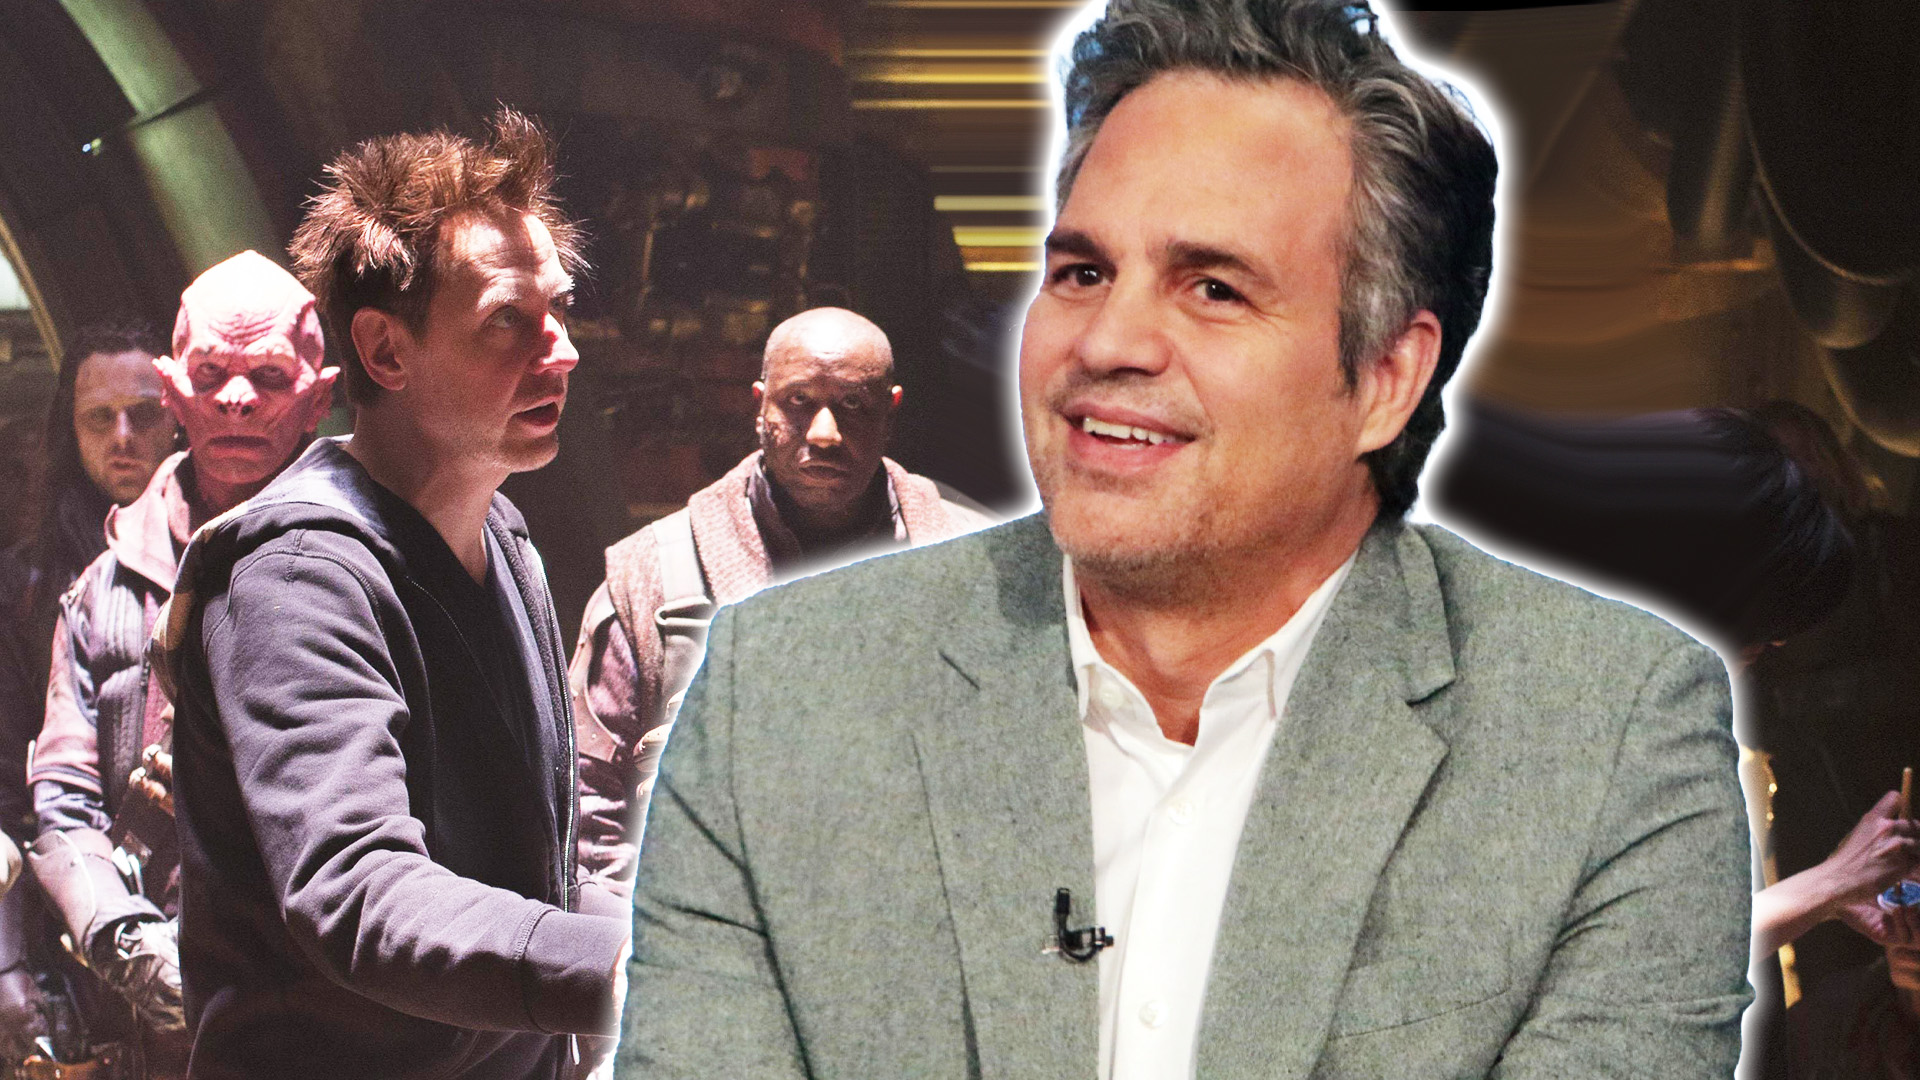 Mark Ruffalo Confirms What Marvel Fans Thought About James Gunn All Along